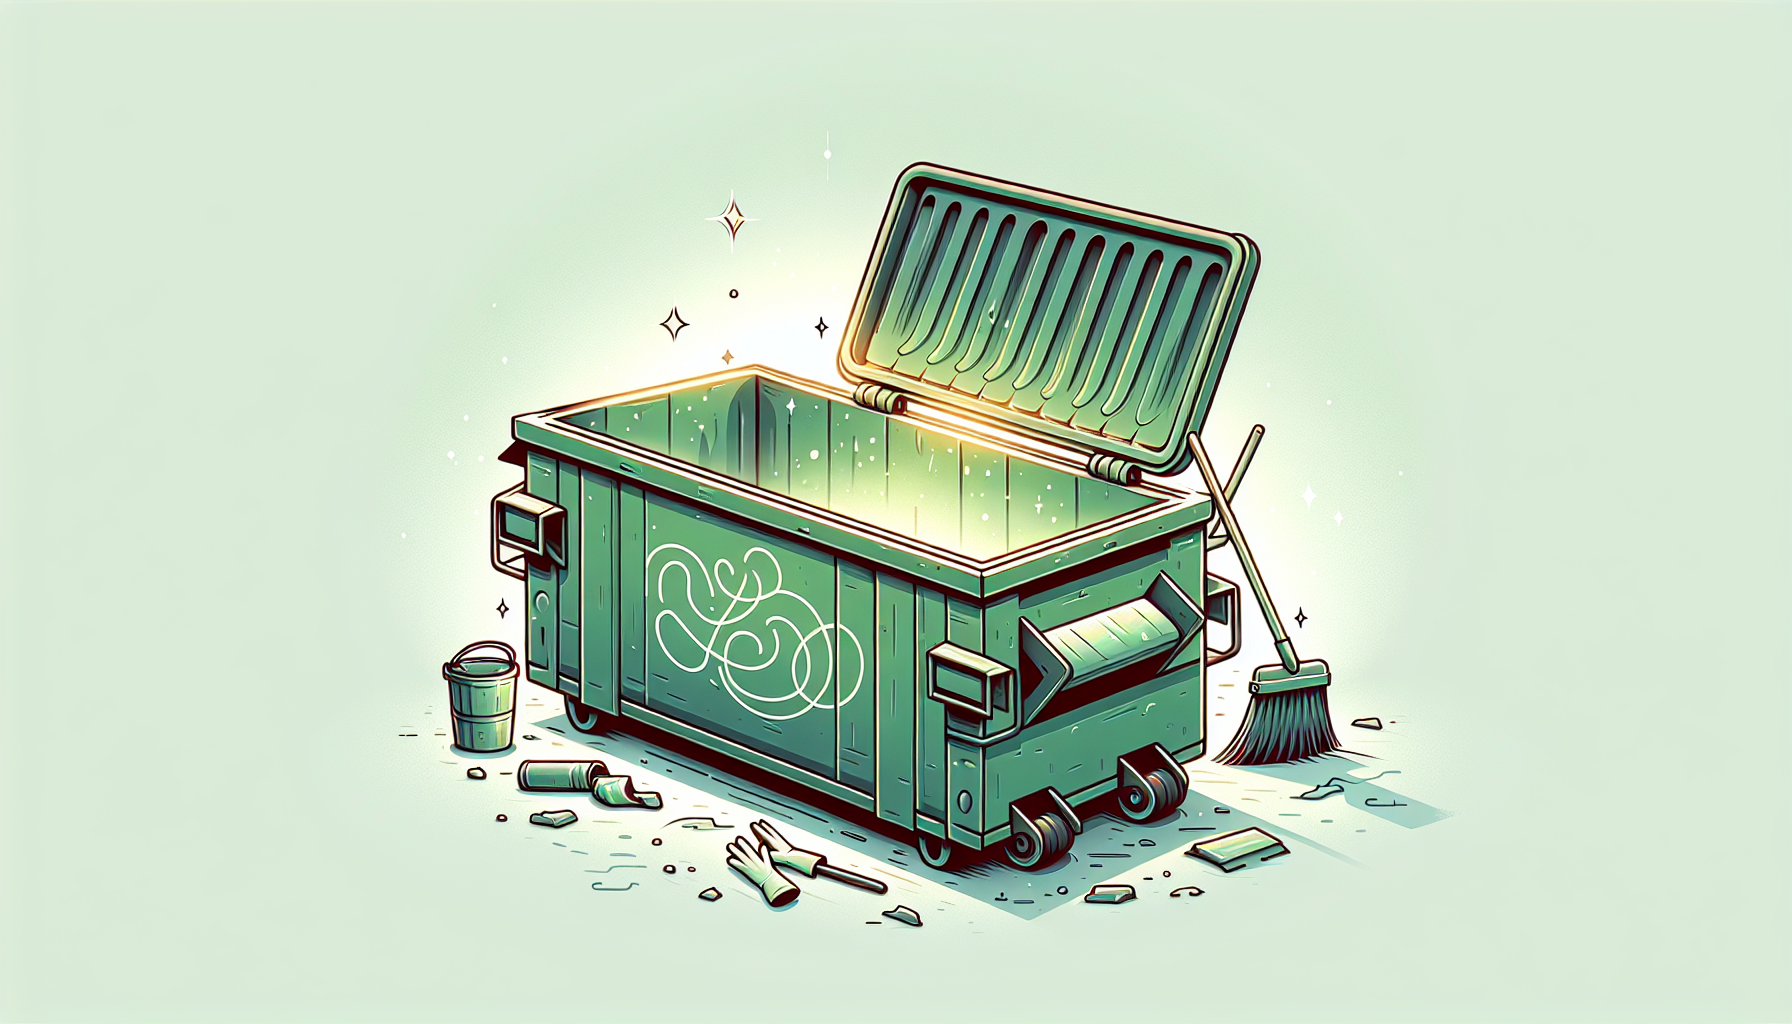 Illustration of a clean and well-maintained dumpster